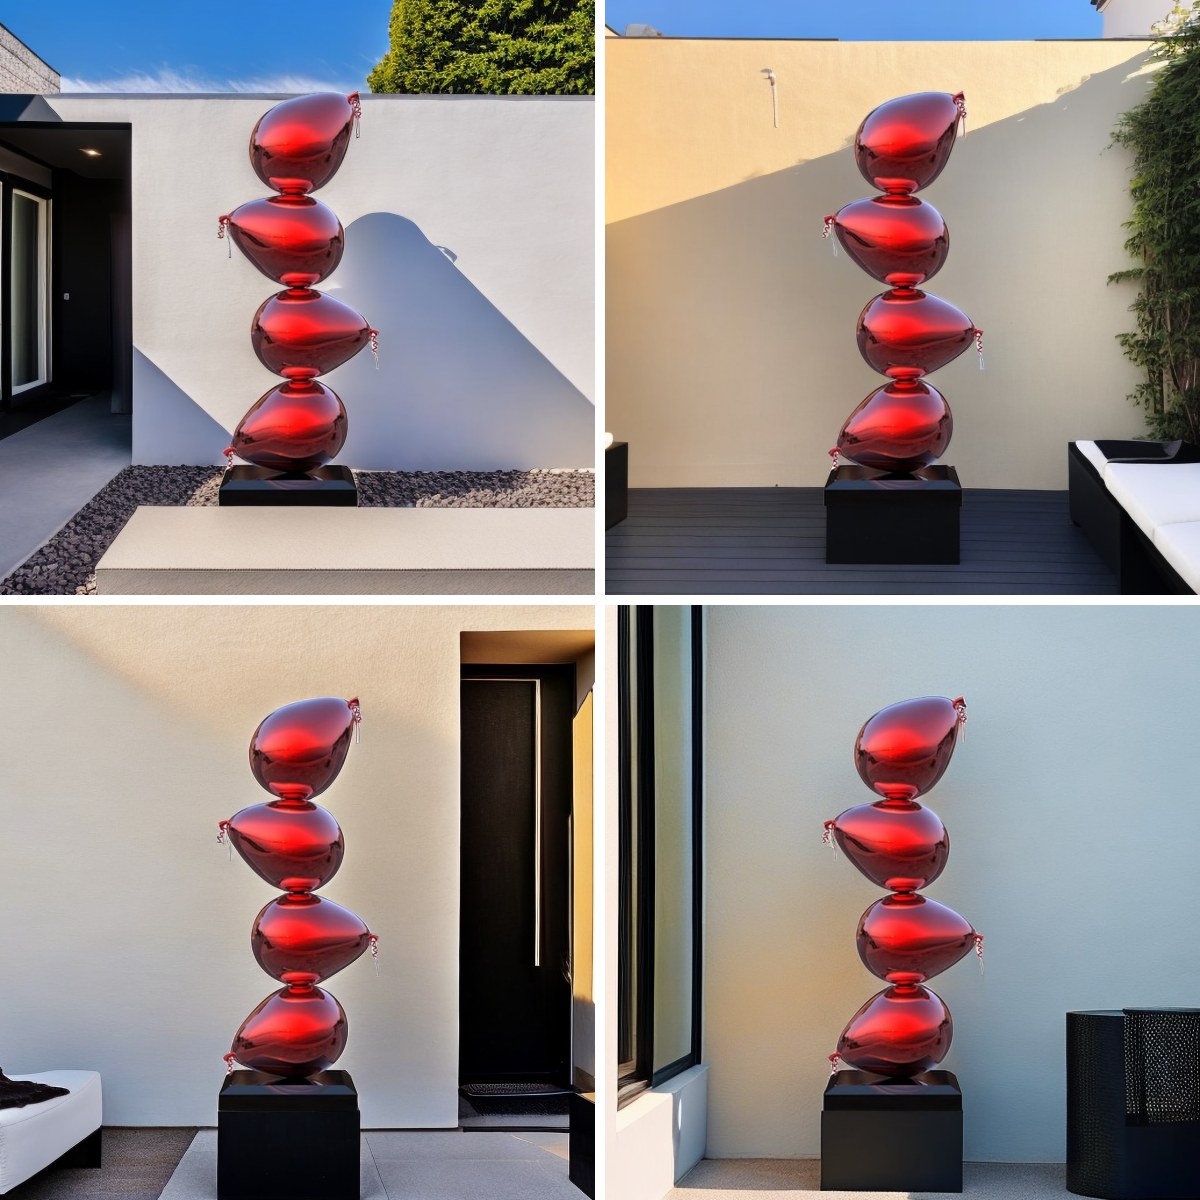 stainless steel balloon sculpture for sale (6)